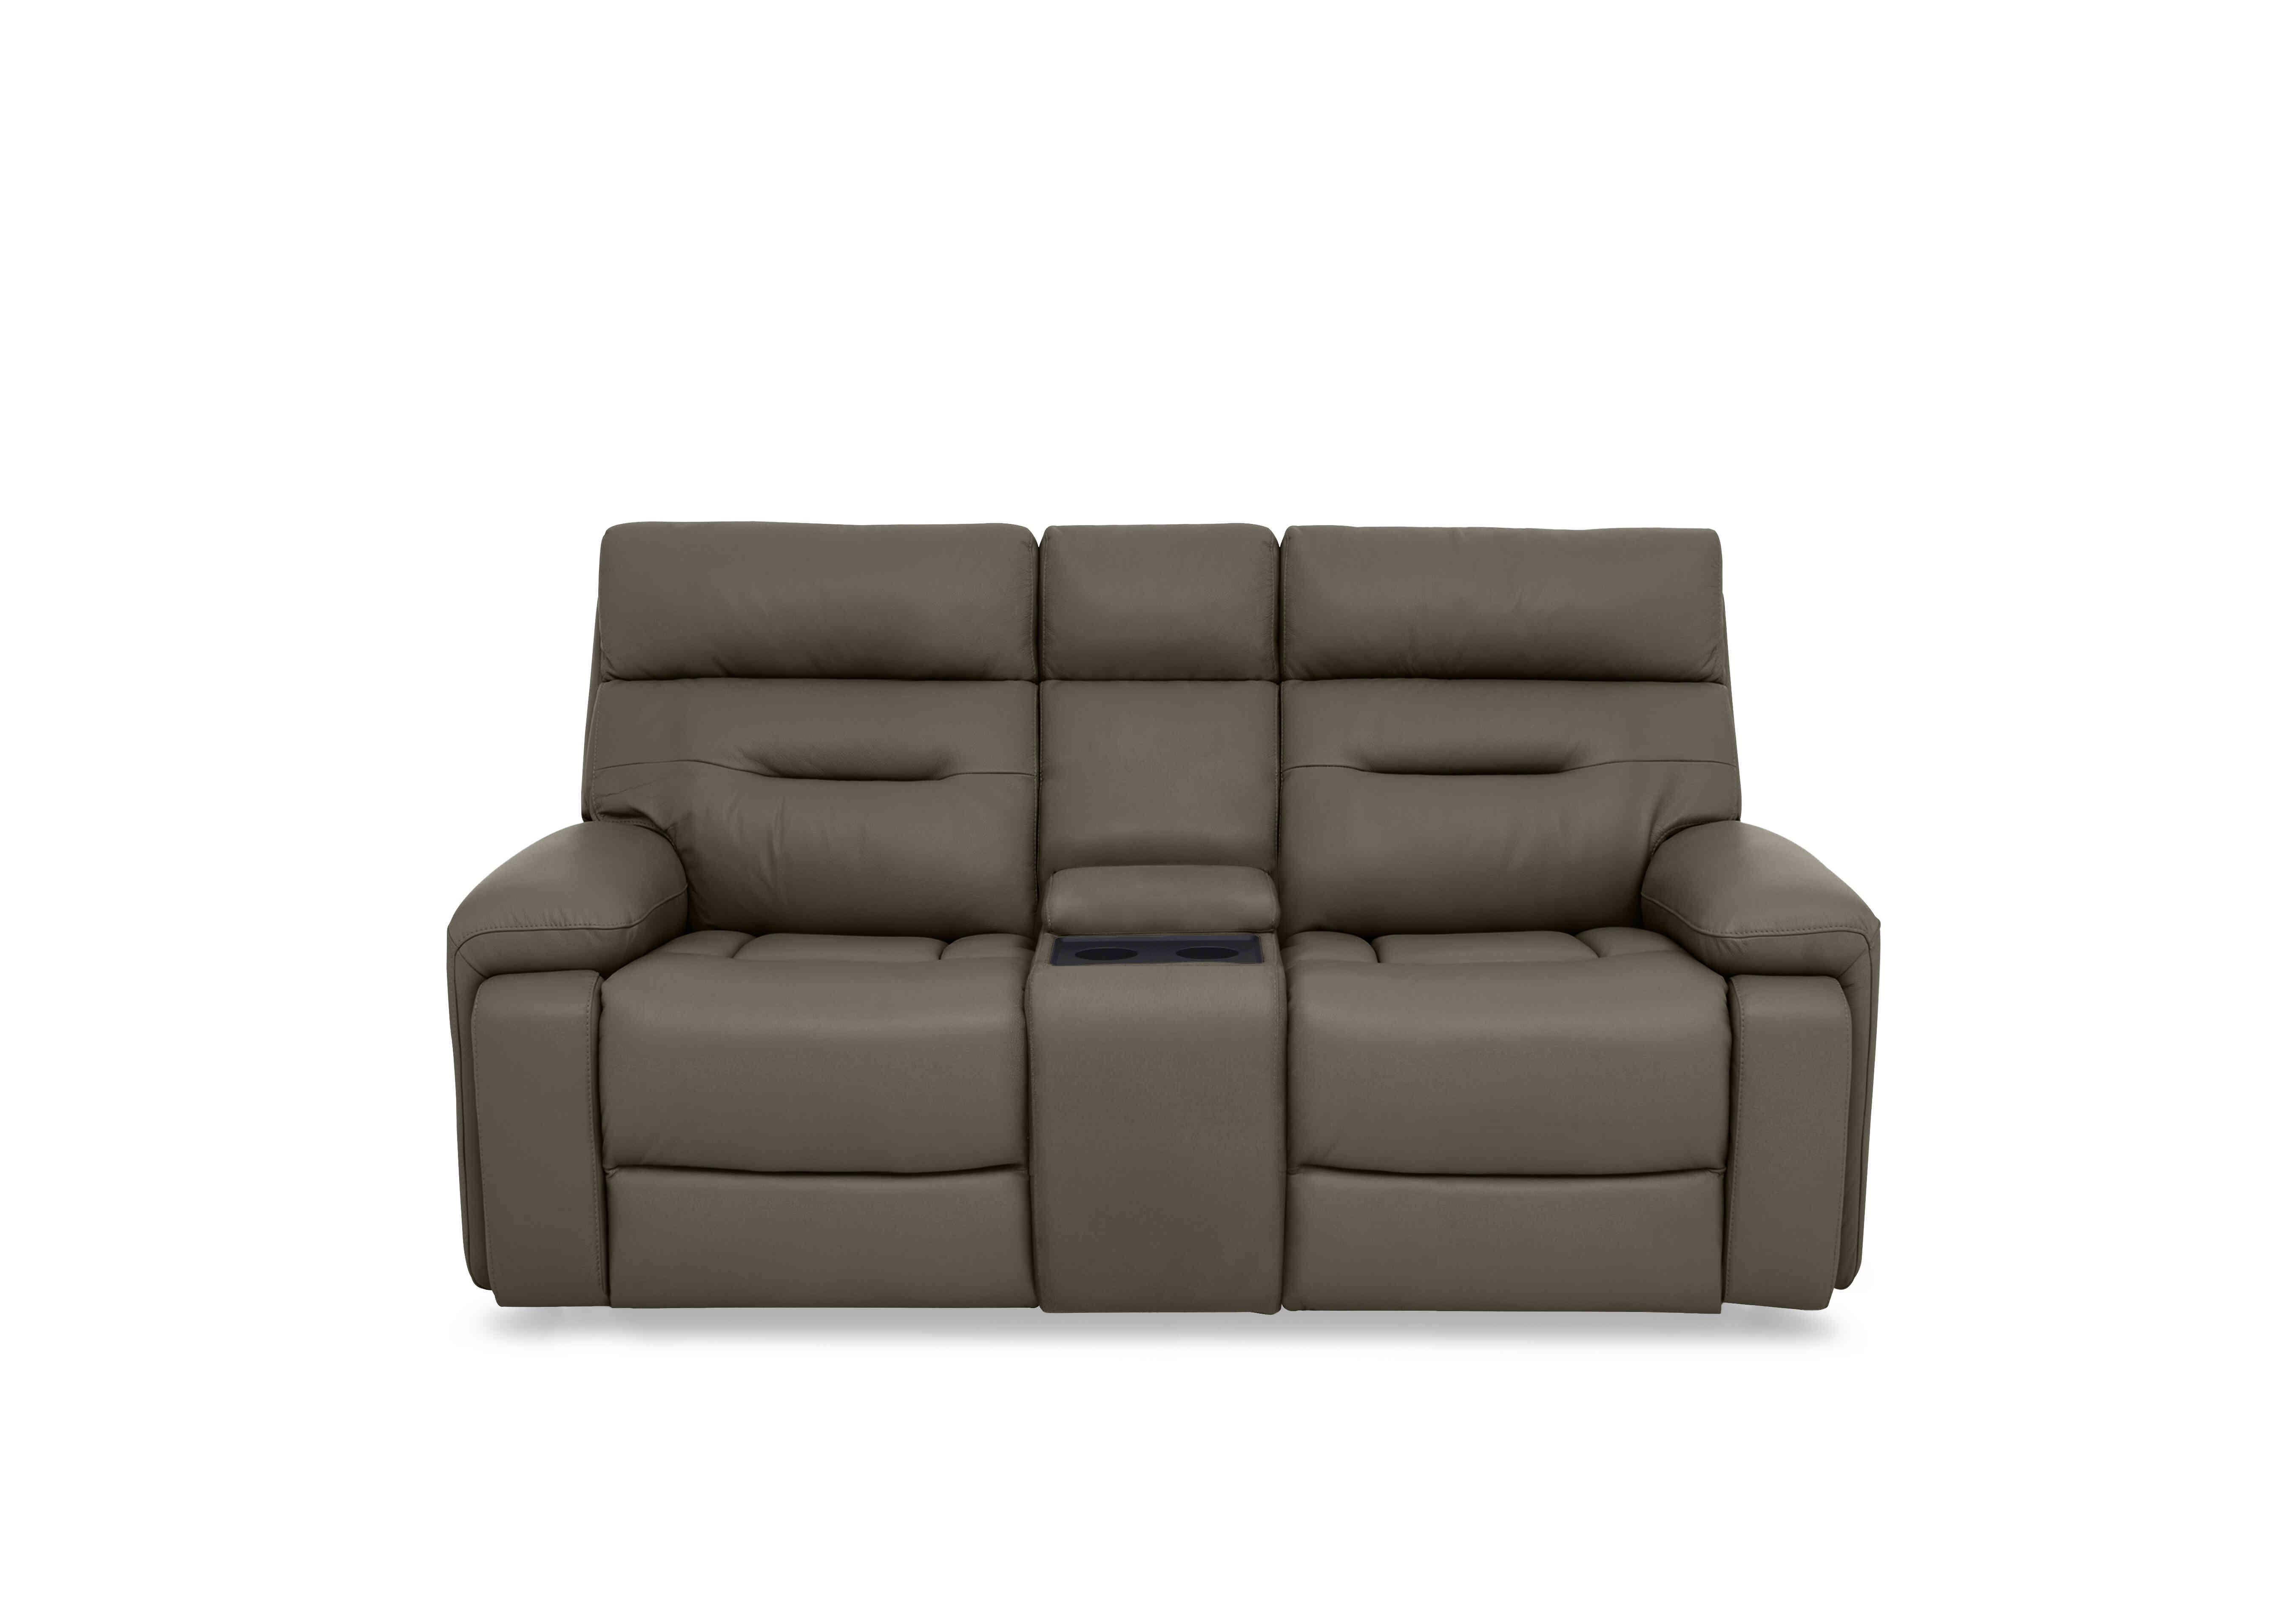 Cinemax Media 2 Seater Leather Power Recliner Sofa with Power Headrests in La-4829 Natural Olive on Furniture Village